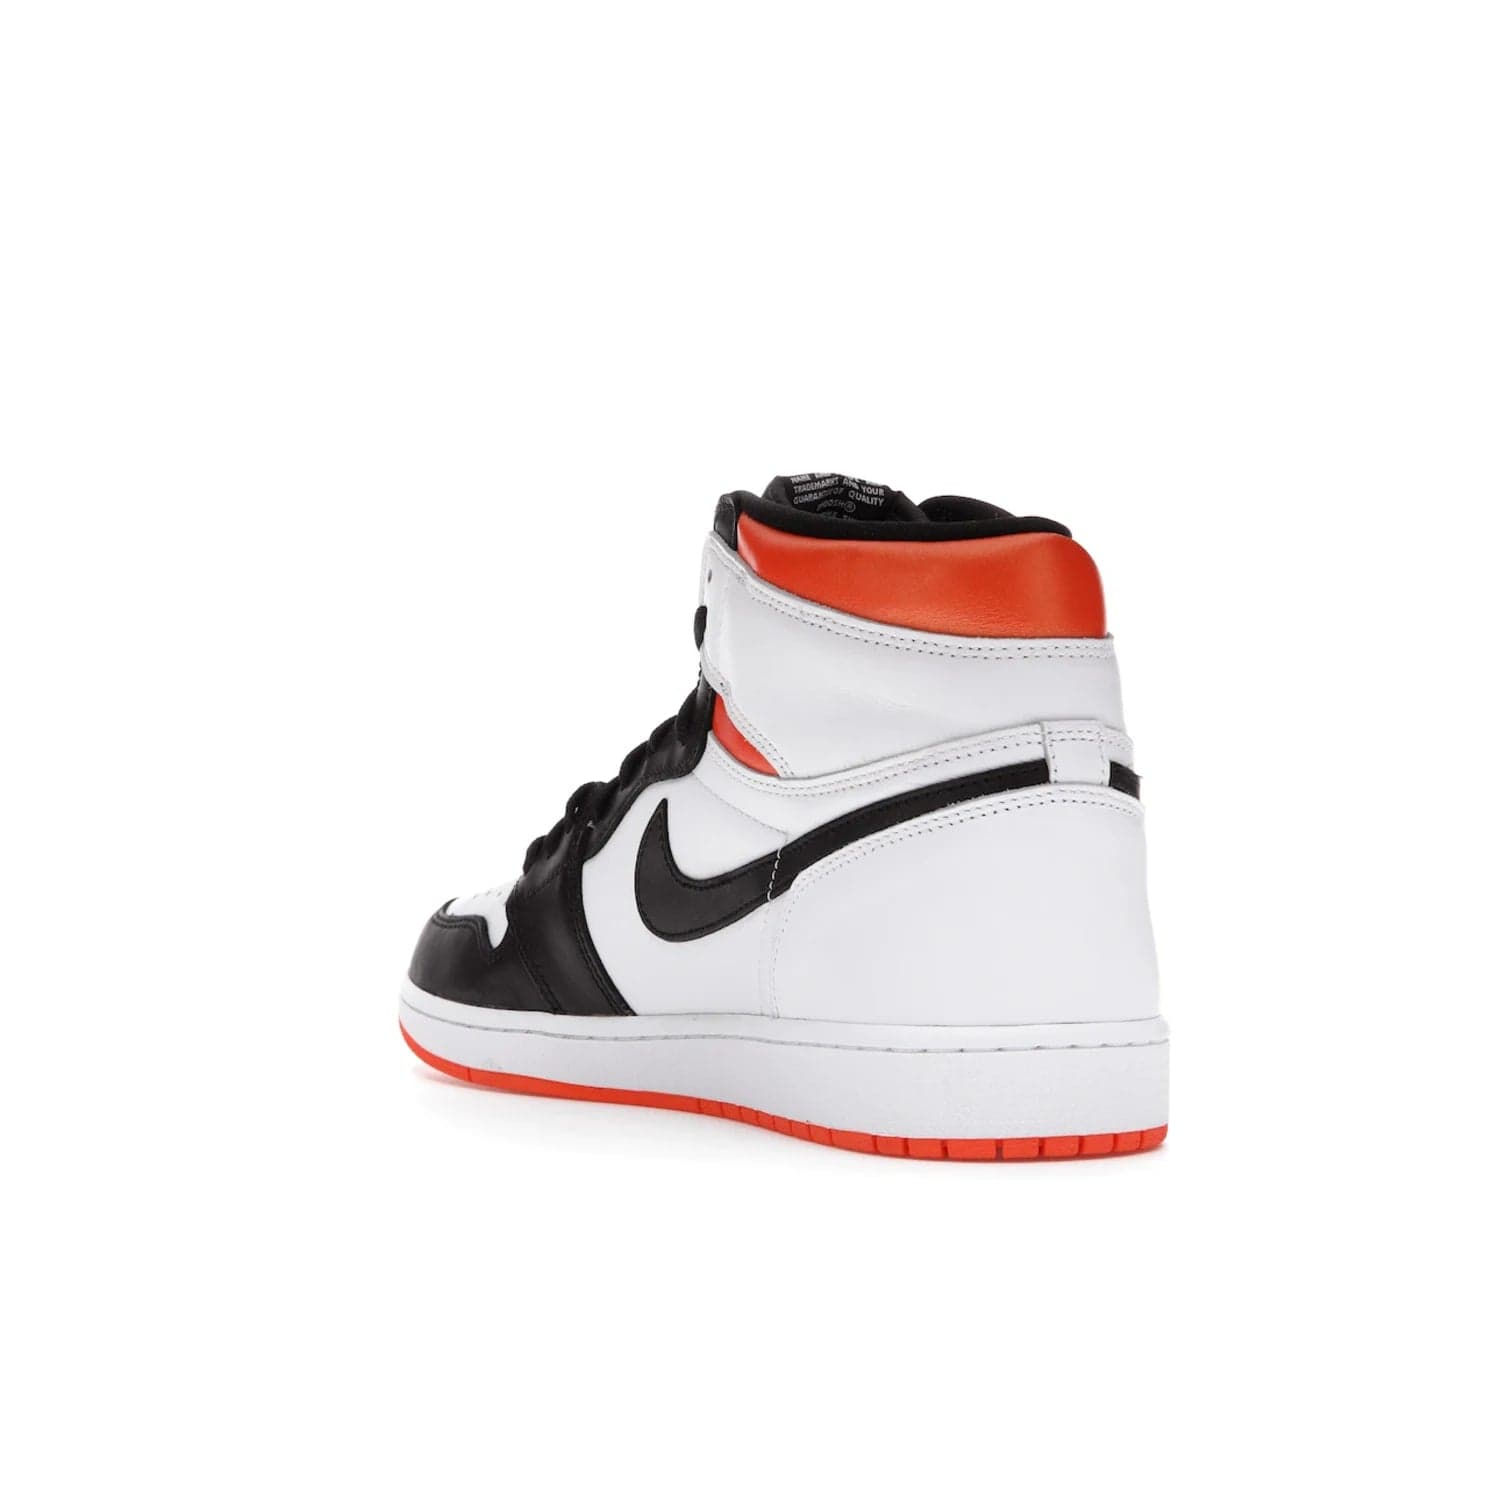 Jordan 1 Retro High Electro Orange - Image 25 - Only at www.BallersClubKickz.com - This Air Jordan 1 Retro High Electro Orange features a white leather upper with black overlays and vibrant Hyper Orange ankle wrap. Turn heads with this iconic design of woven tongue label and sole. Get yours today and add some serious style to your rotation.